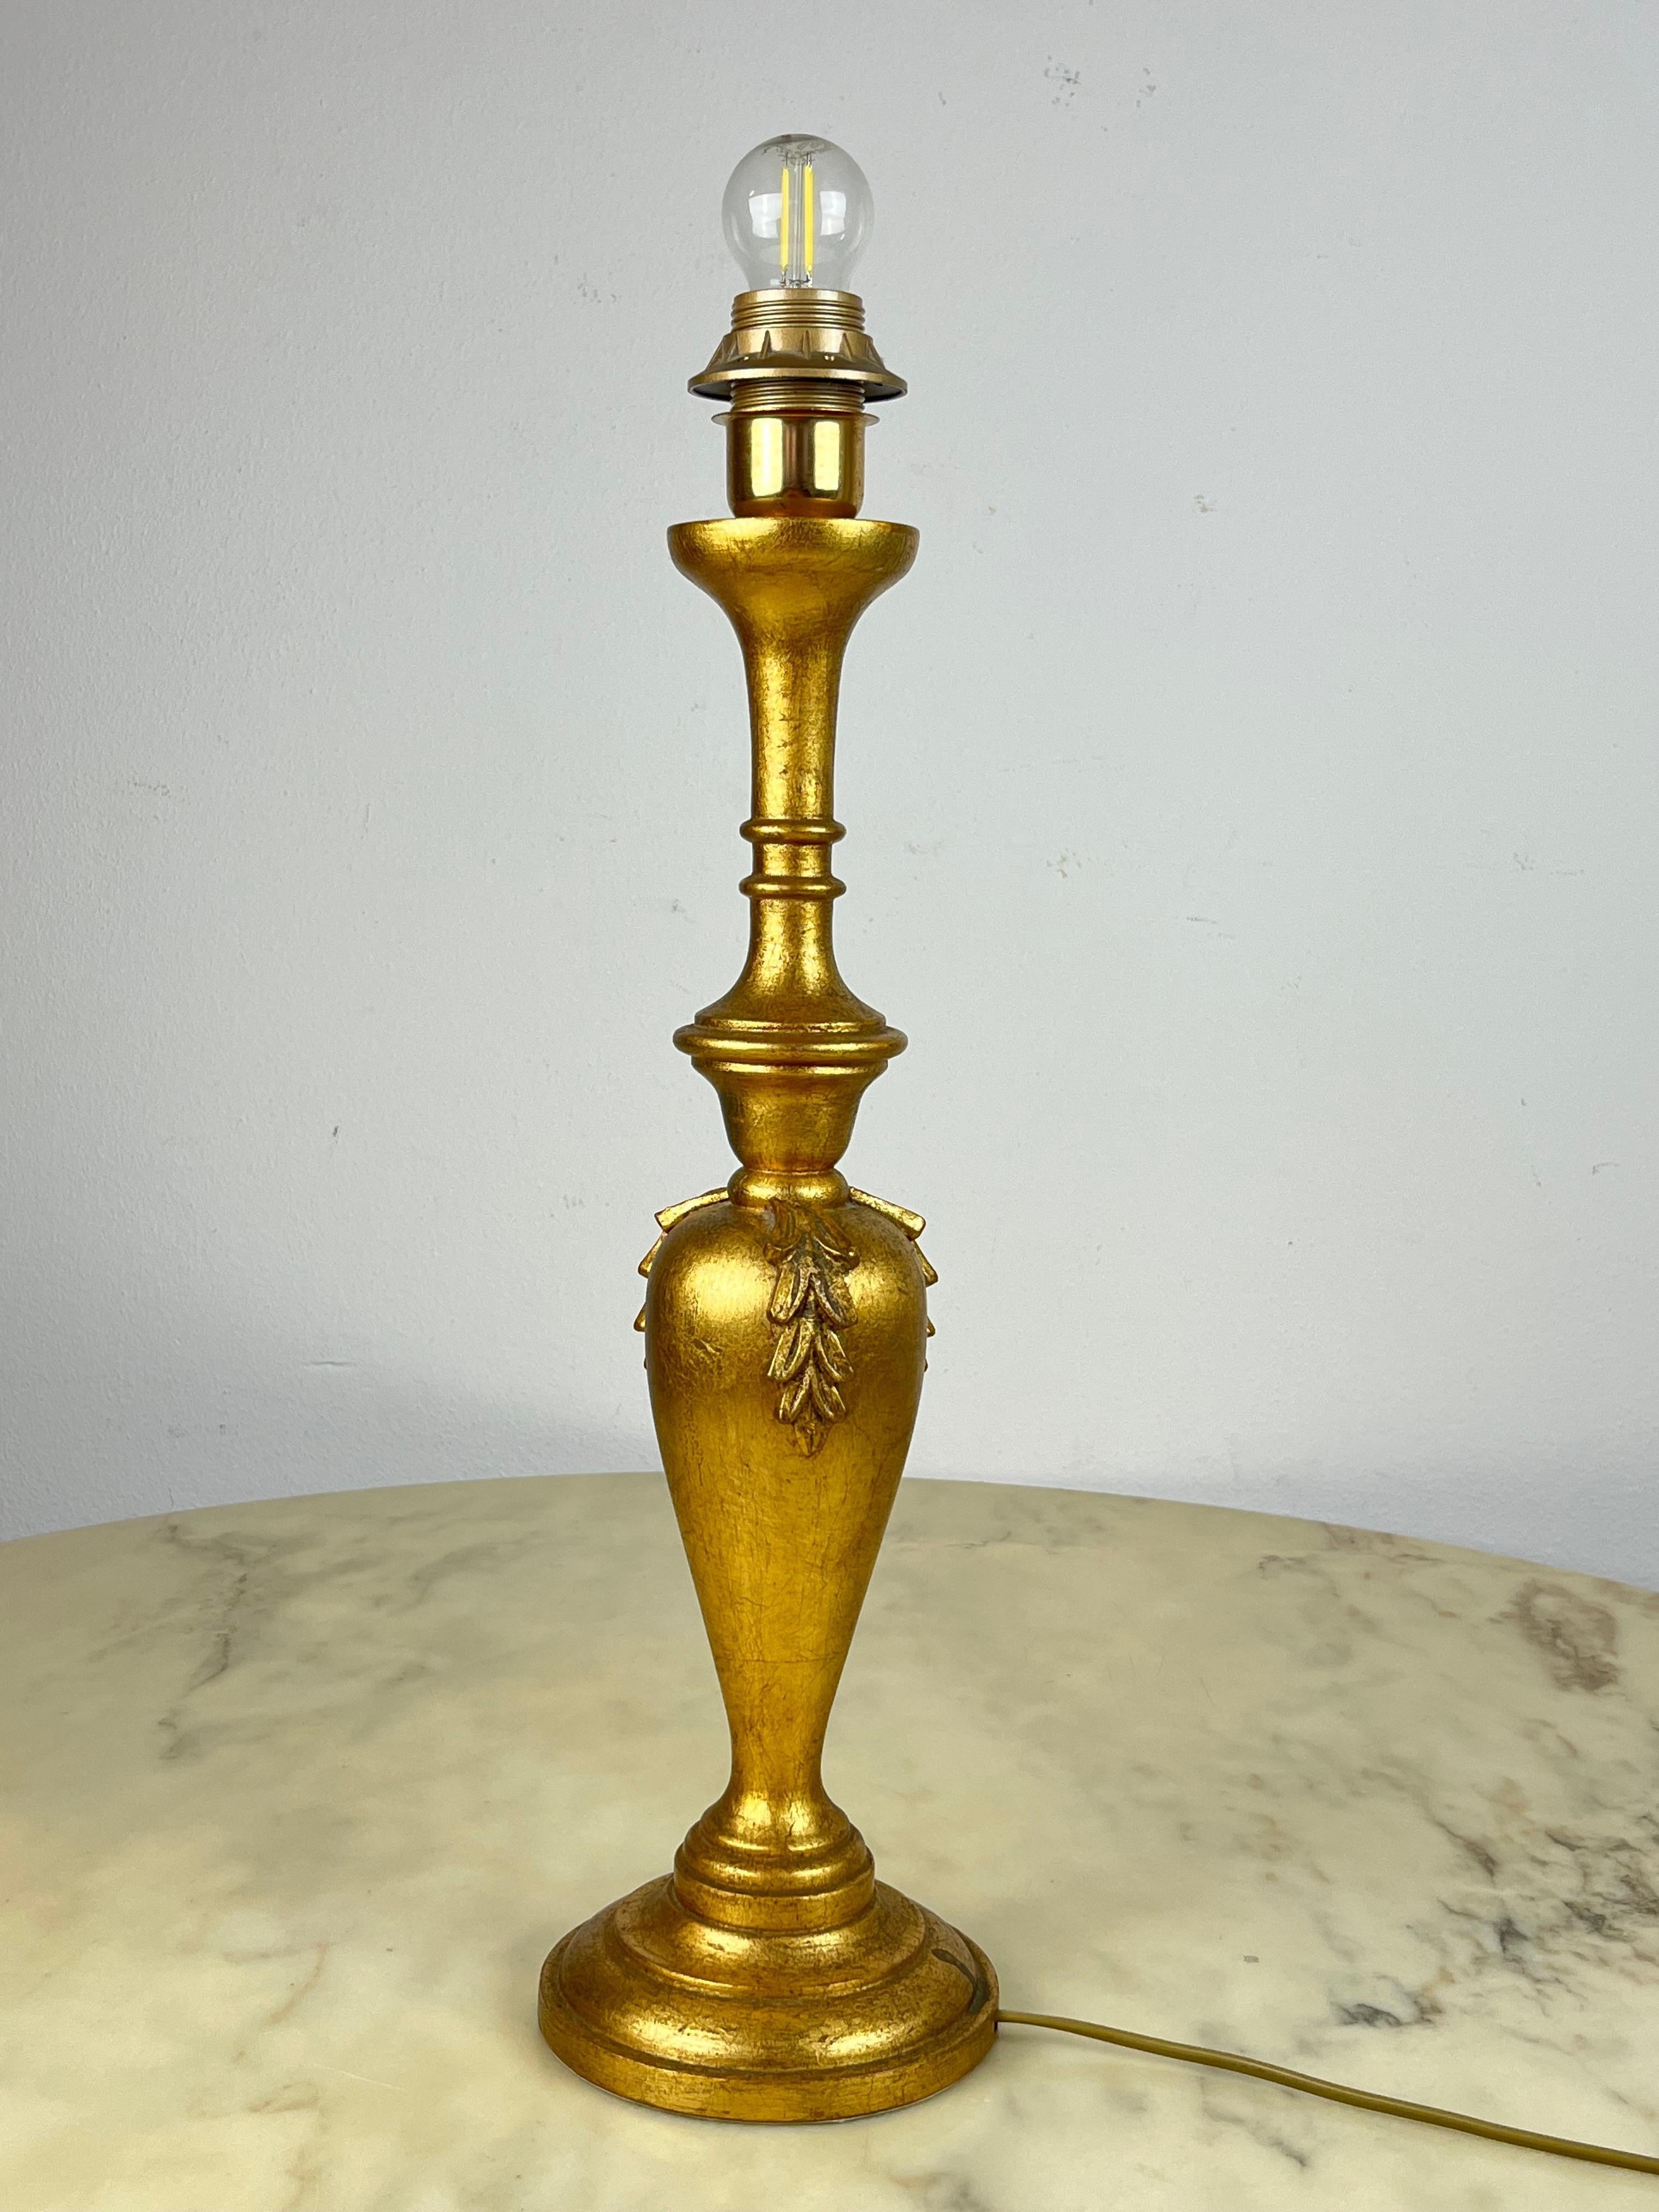 Torcia table lamp in golden beech wood, Italy, 1980s
Found in a noble apartment. It is intact and functioning. Small signs of aging.